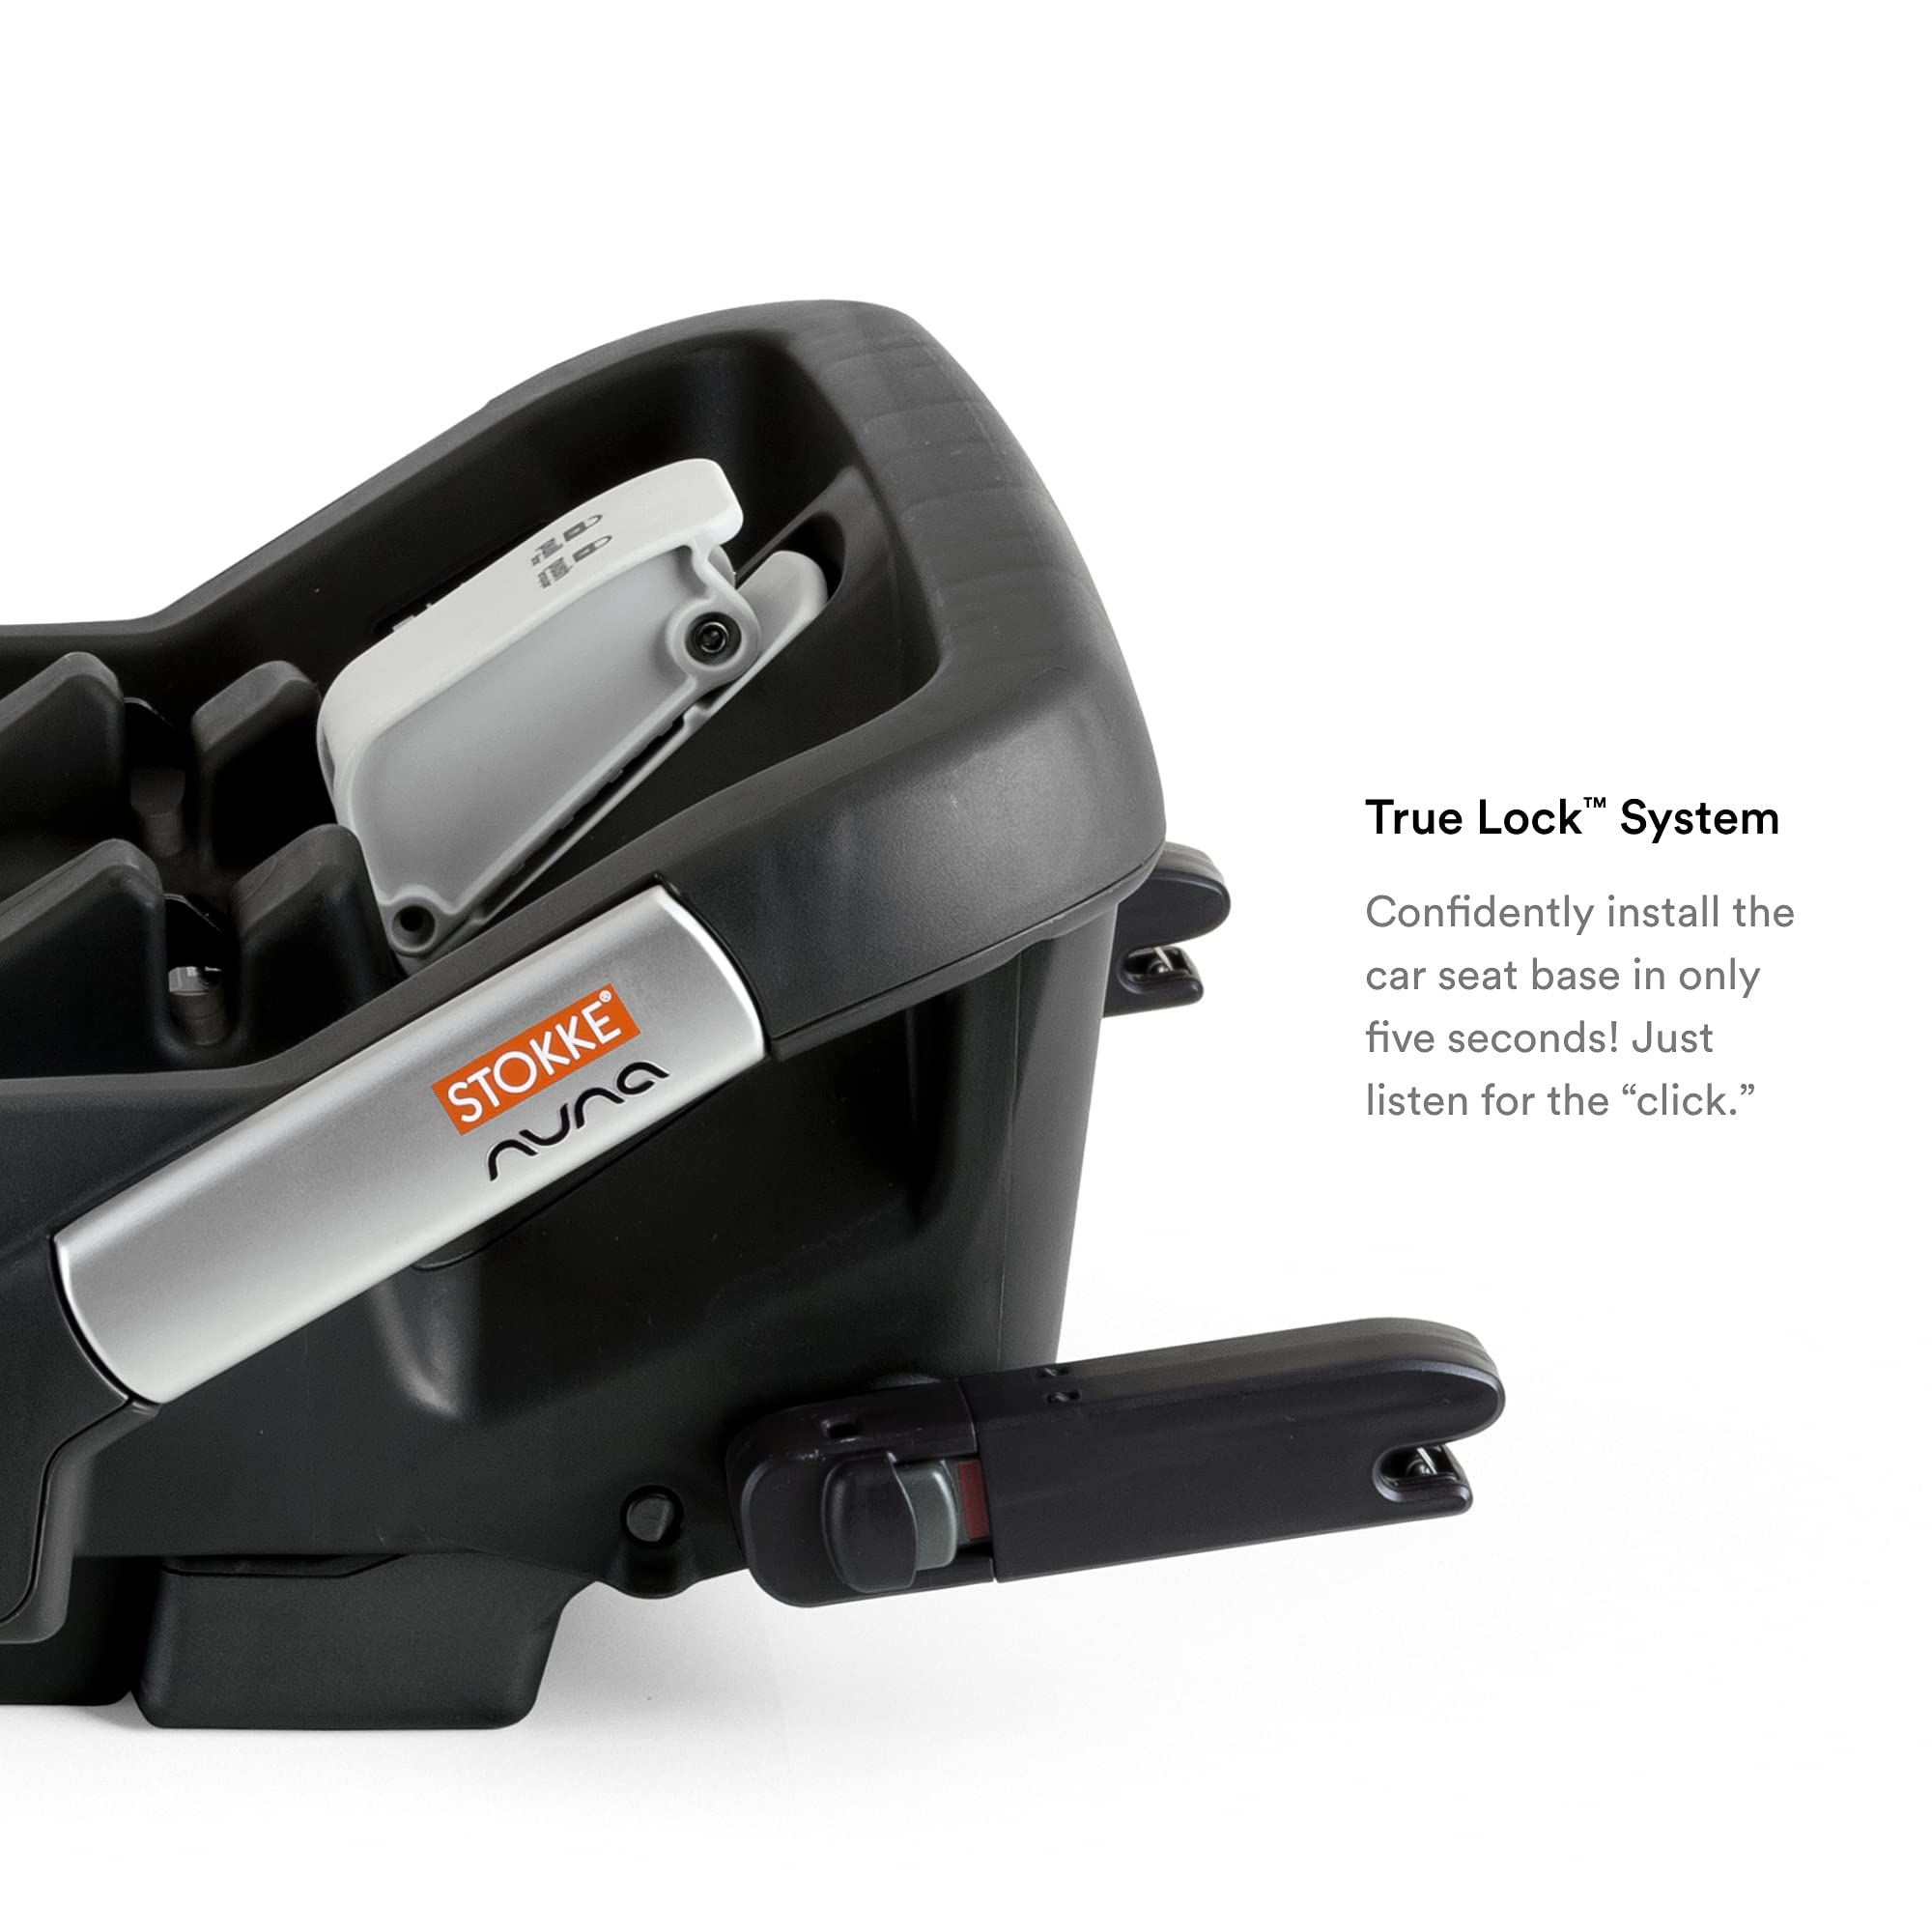 Stokke PIPA by Nuna Car Seat Base, Black - Effortless Installation - for Babies Up to 32 lbs. - Steel Stability Leg for Safety - Latch Compatible